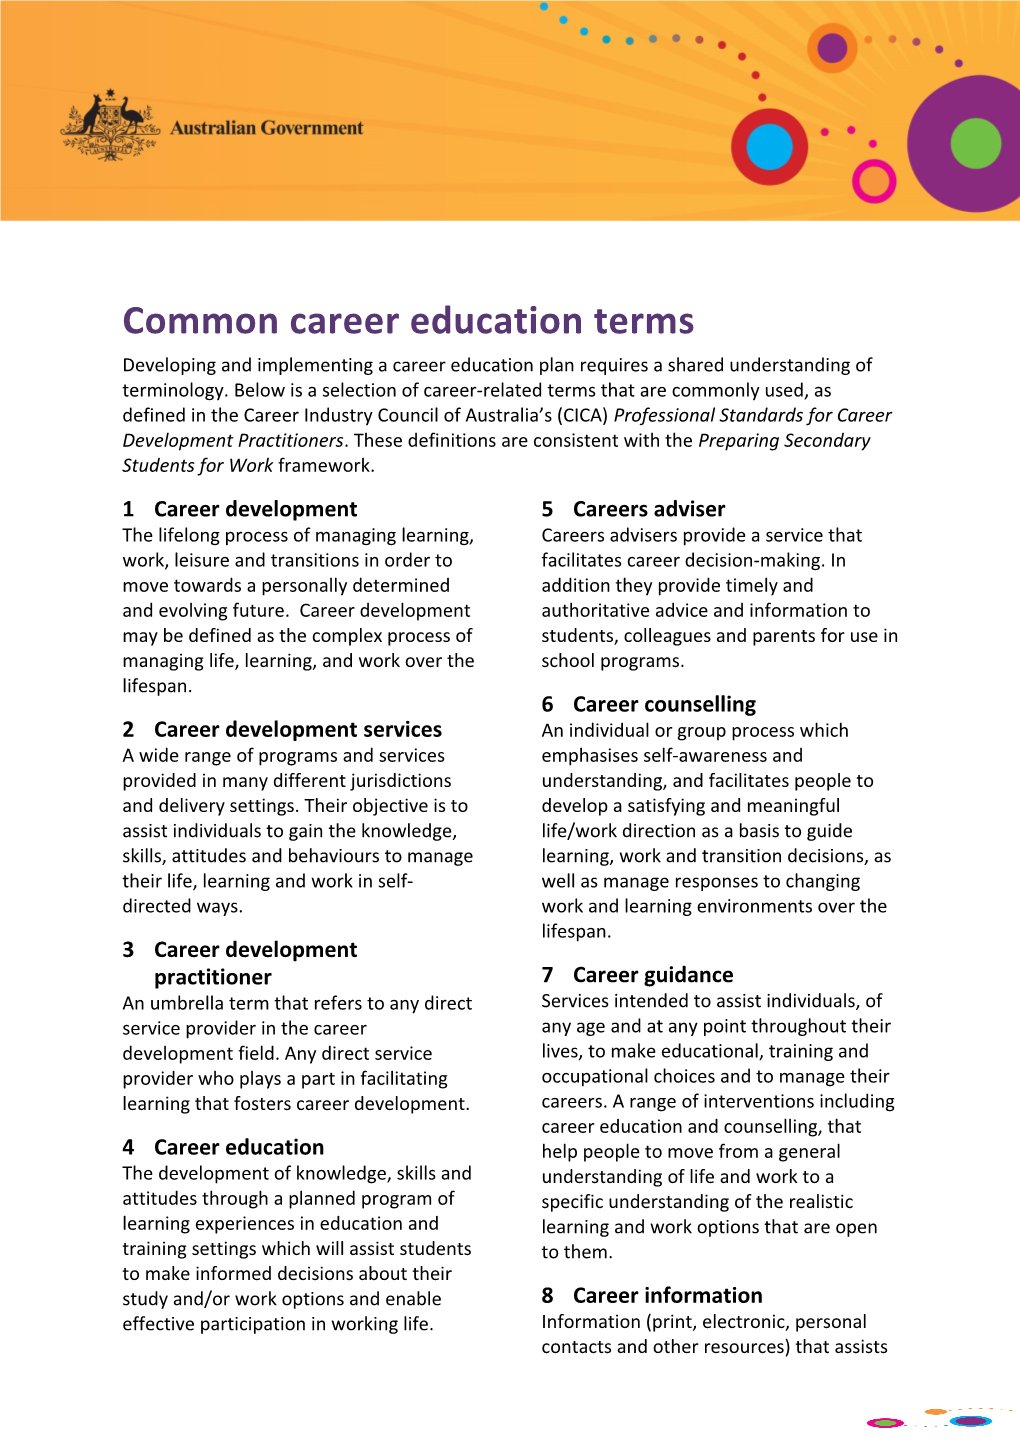 Common Career Education Terms